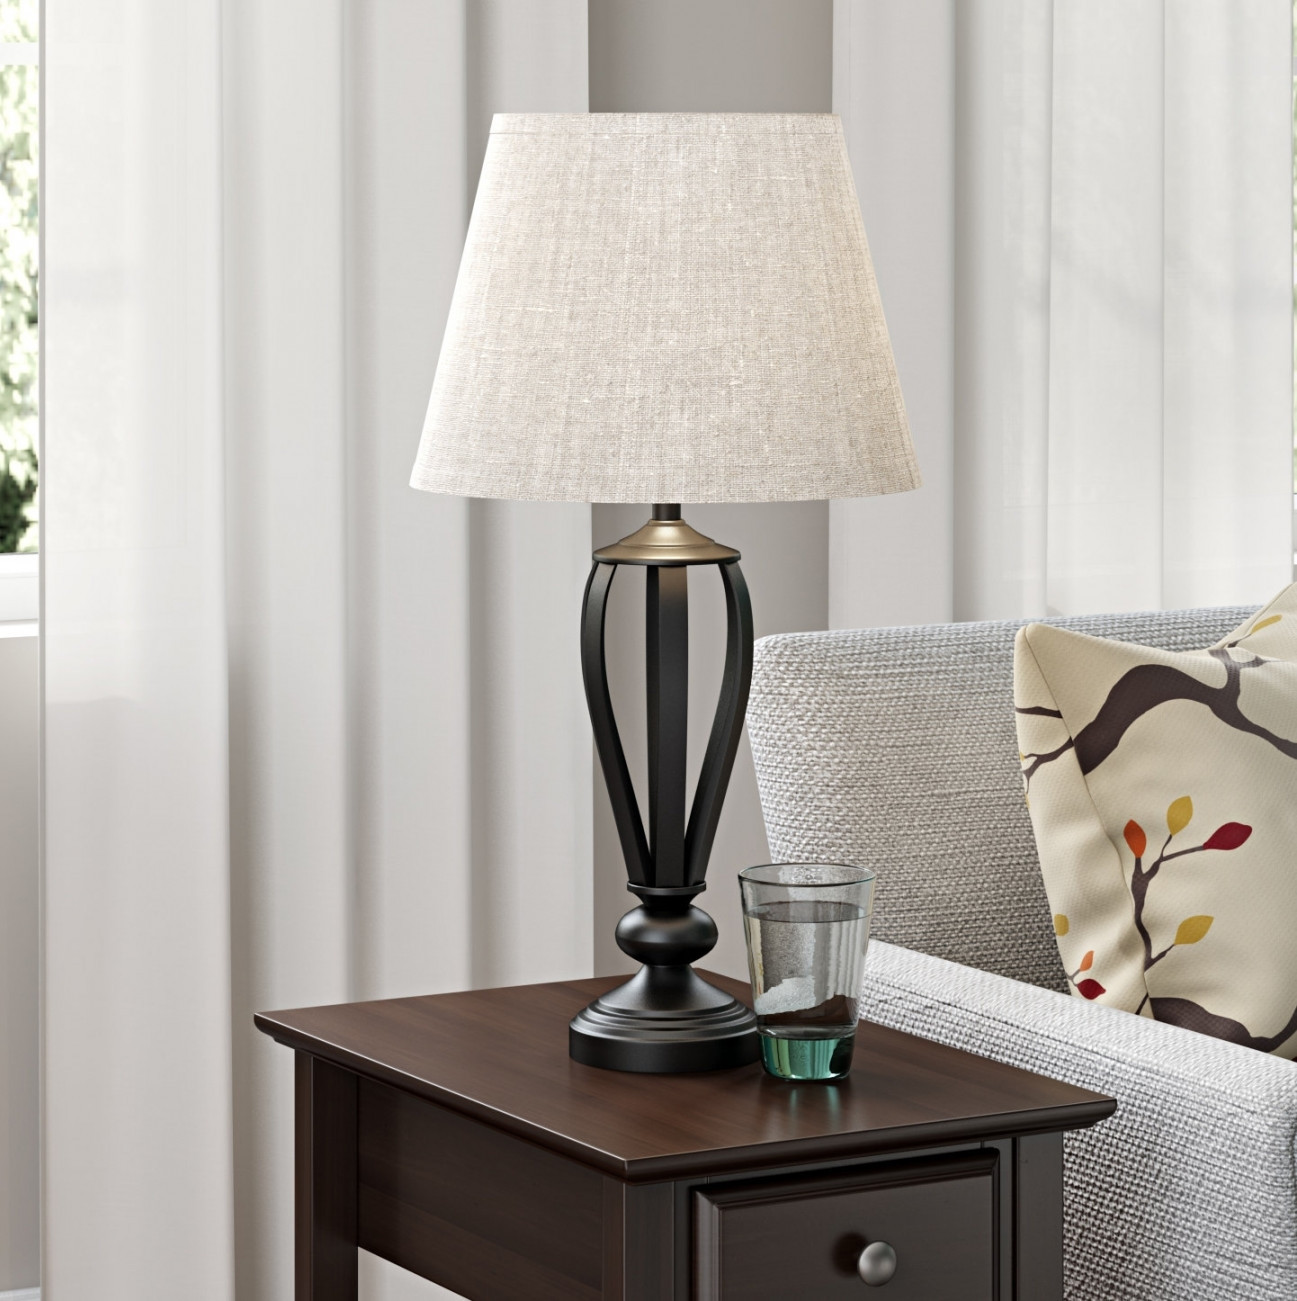 Living Room Lamp Table
 15 of Wayfair Living Room Table Lamps